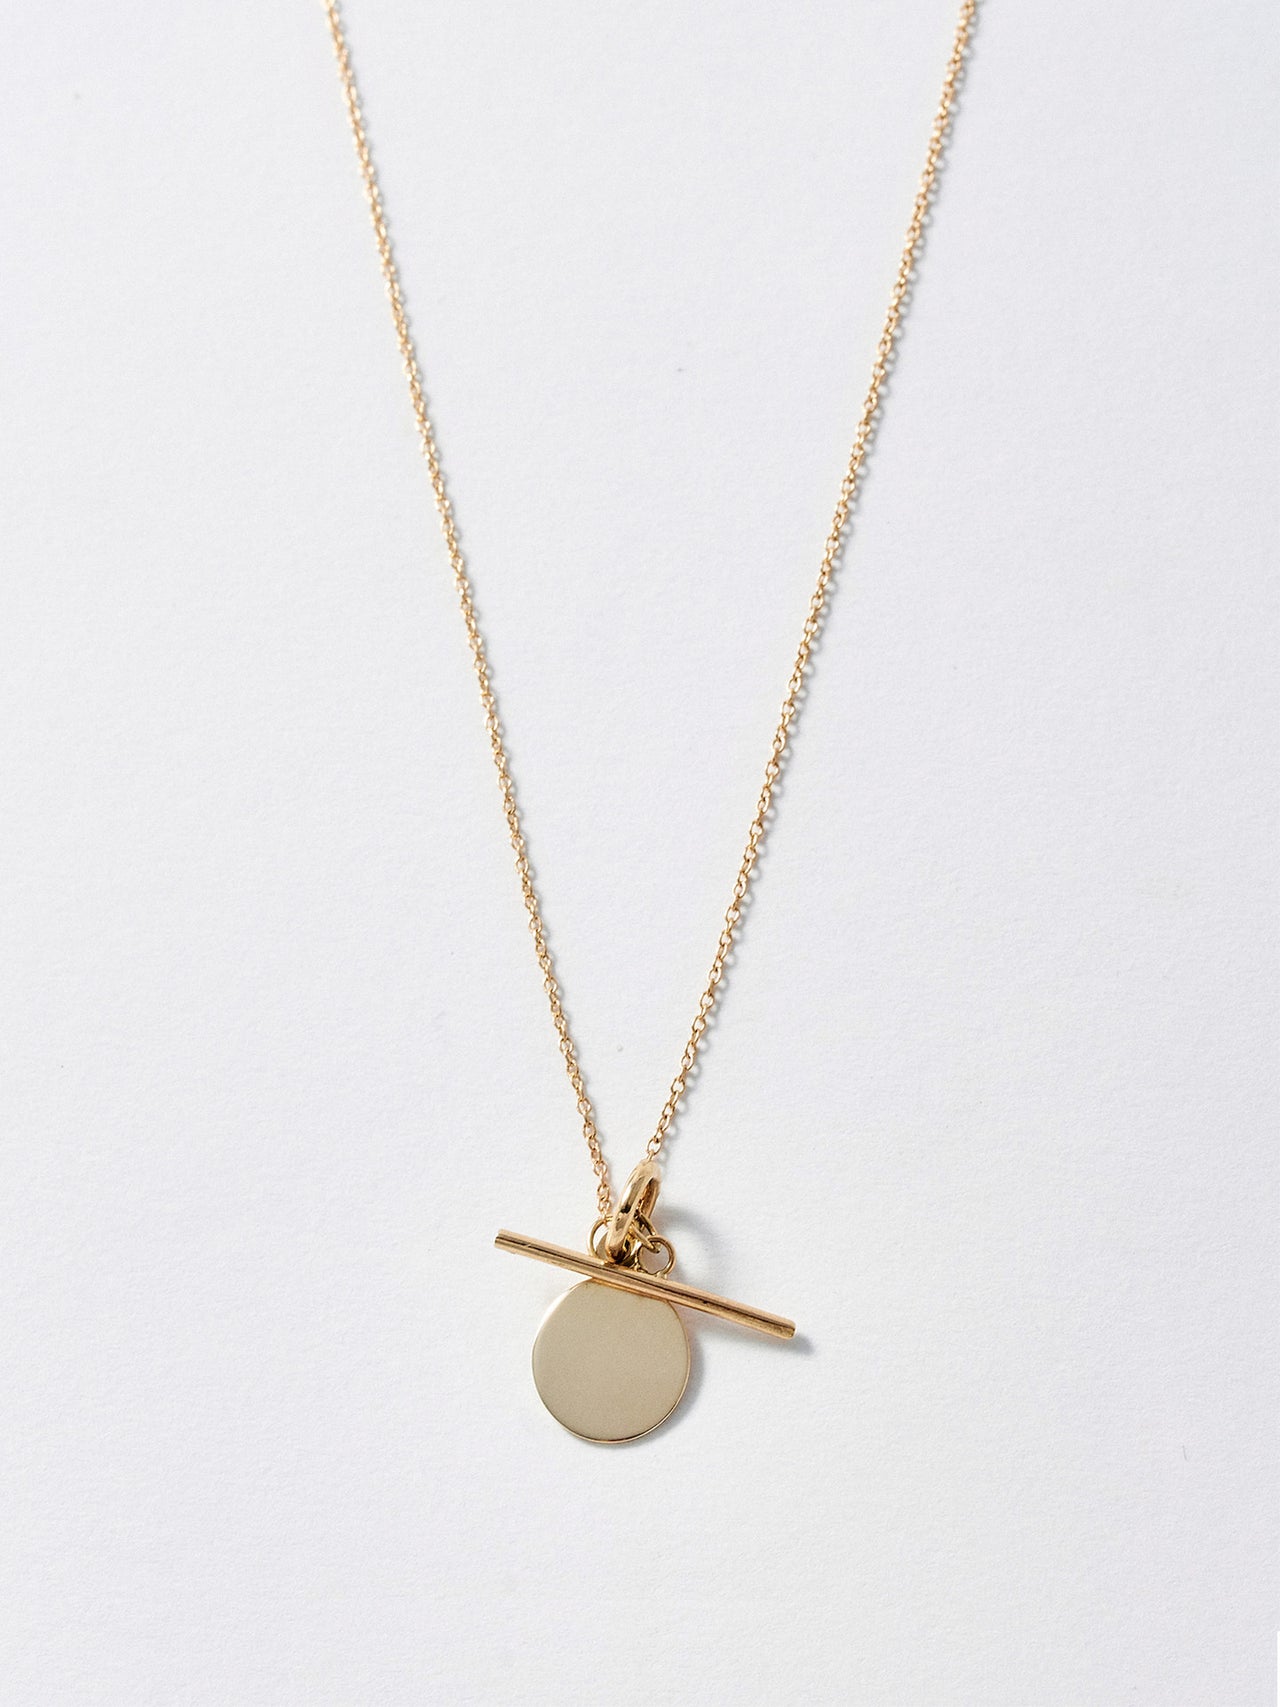 14Kt Yellow Gold Disk and Toggle Necklace pictured on light grey background.